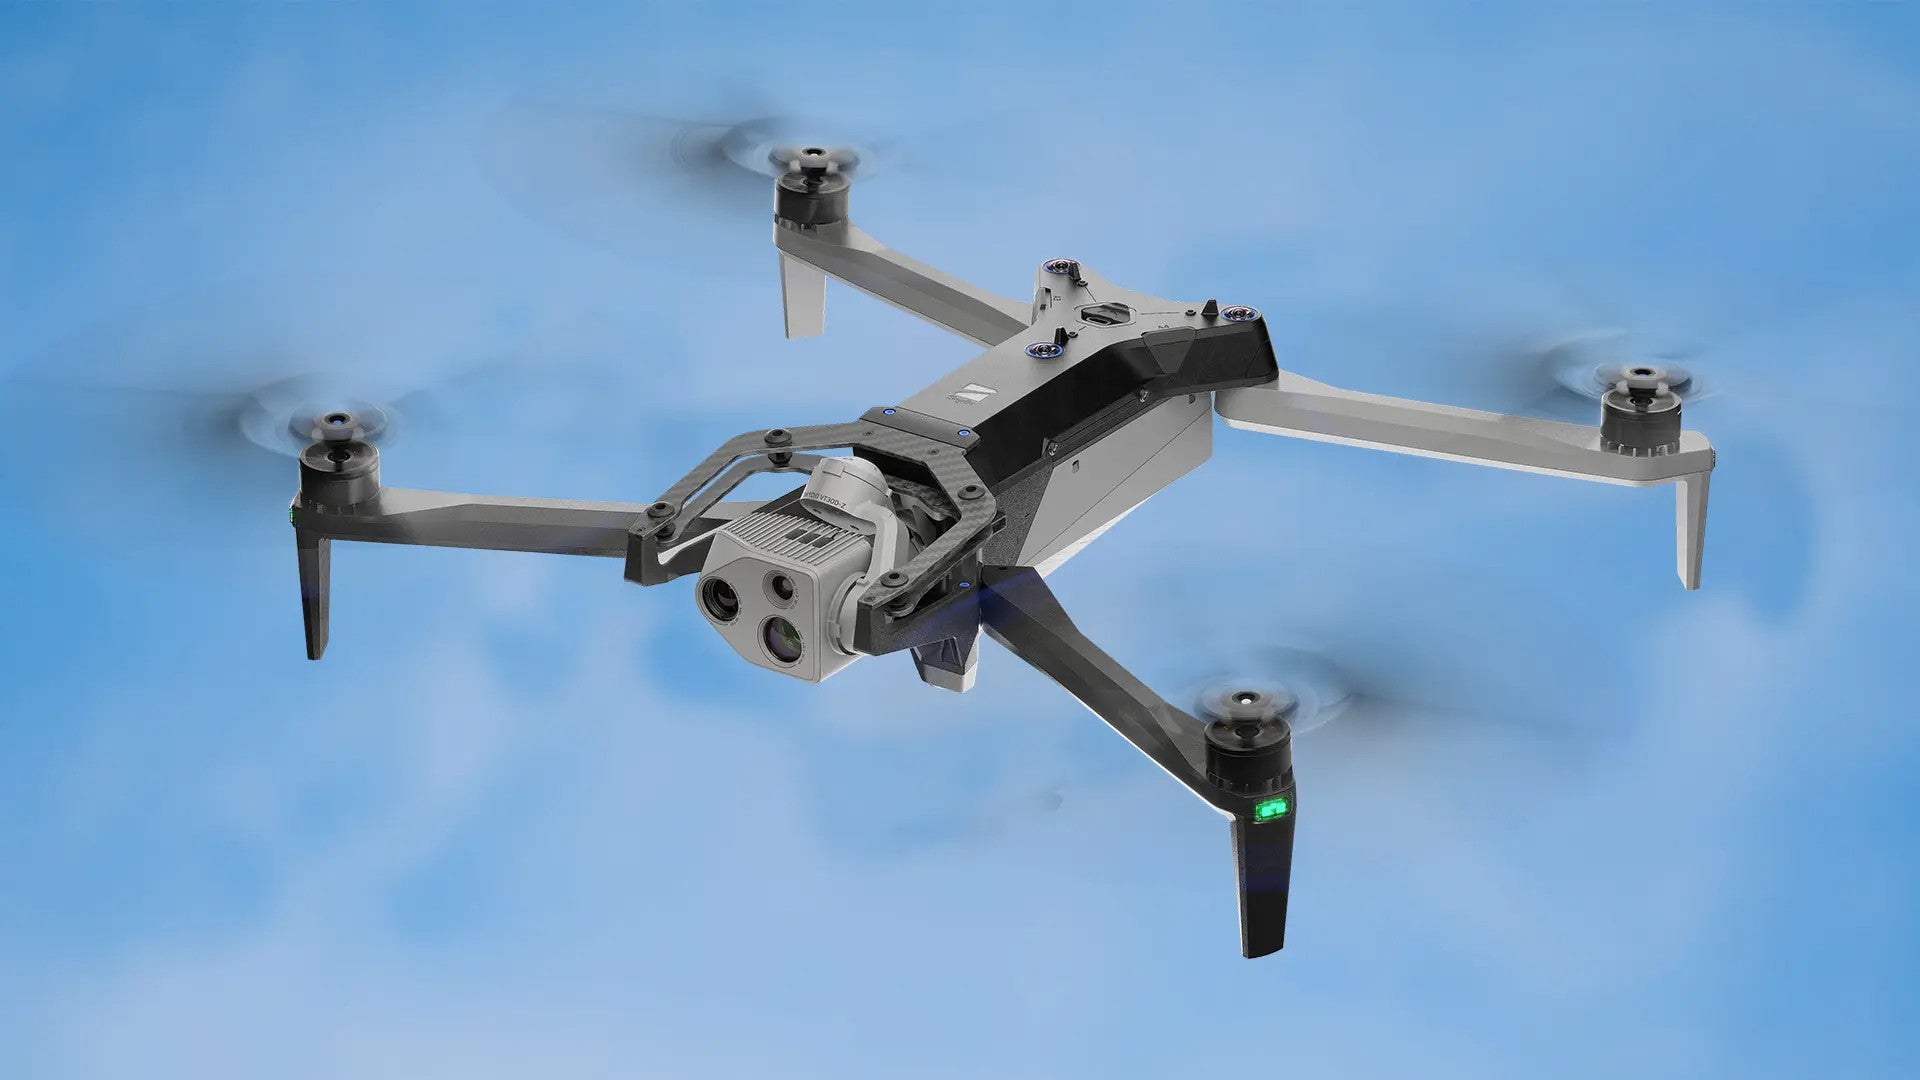 FAA Remote ID Rule for Drones Takes Full Effect